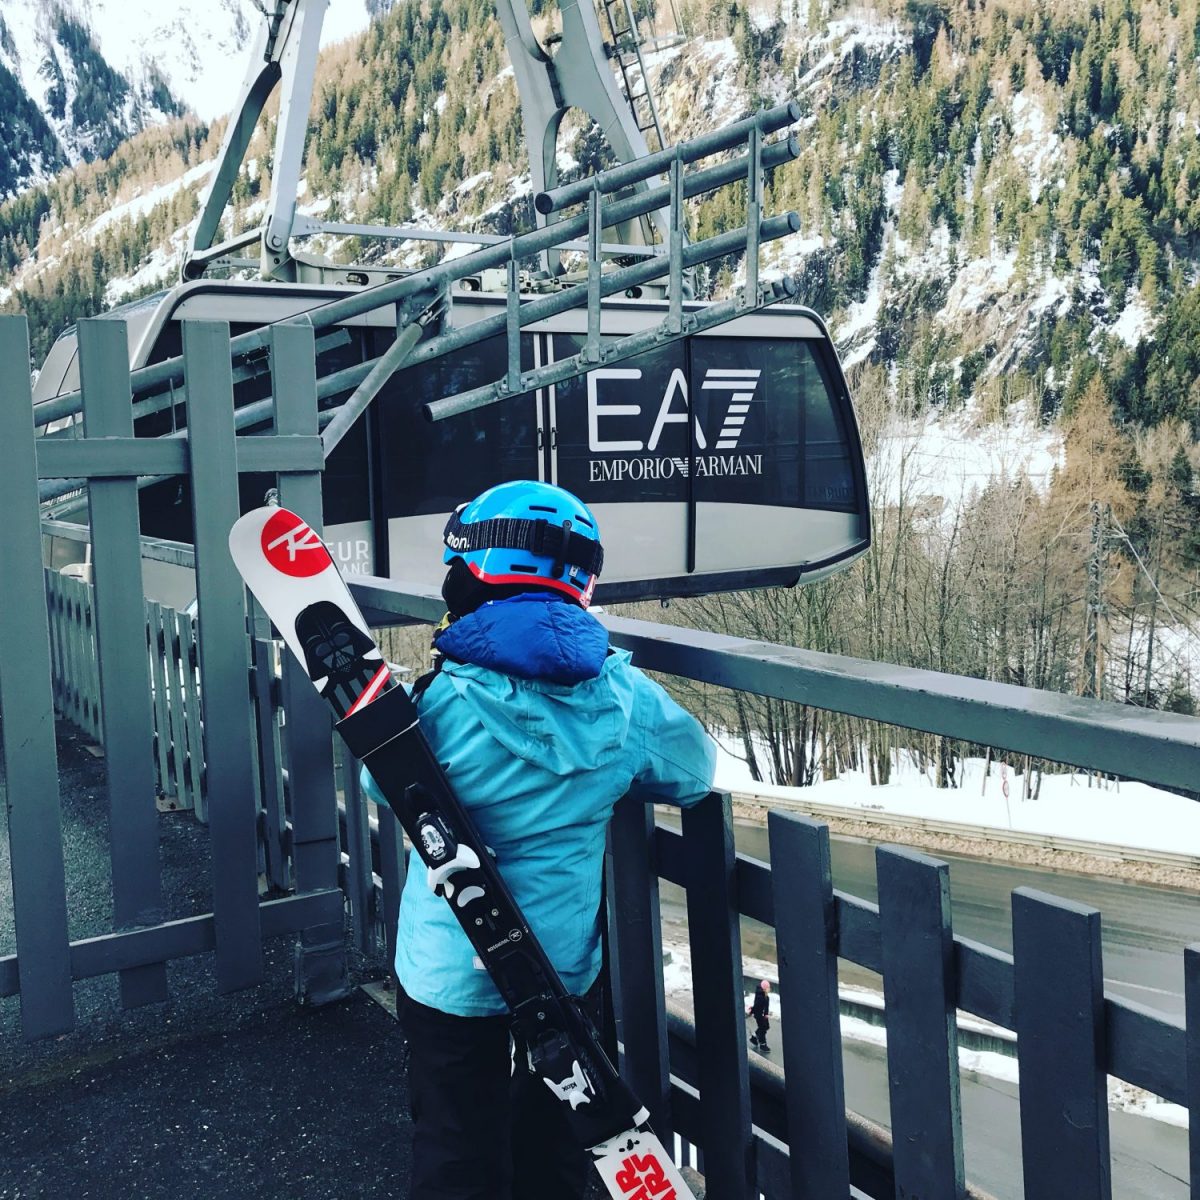 My youngest carrying his own skis with his ski strap waiting the Armani funicular to go to Plan Chécrouit in Courmayeur Mont Blanc. 7 things that can help you when taking kids skiing.